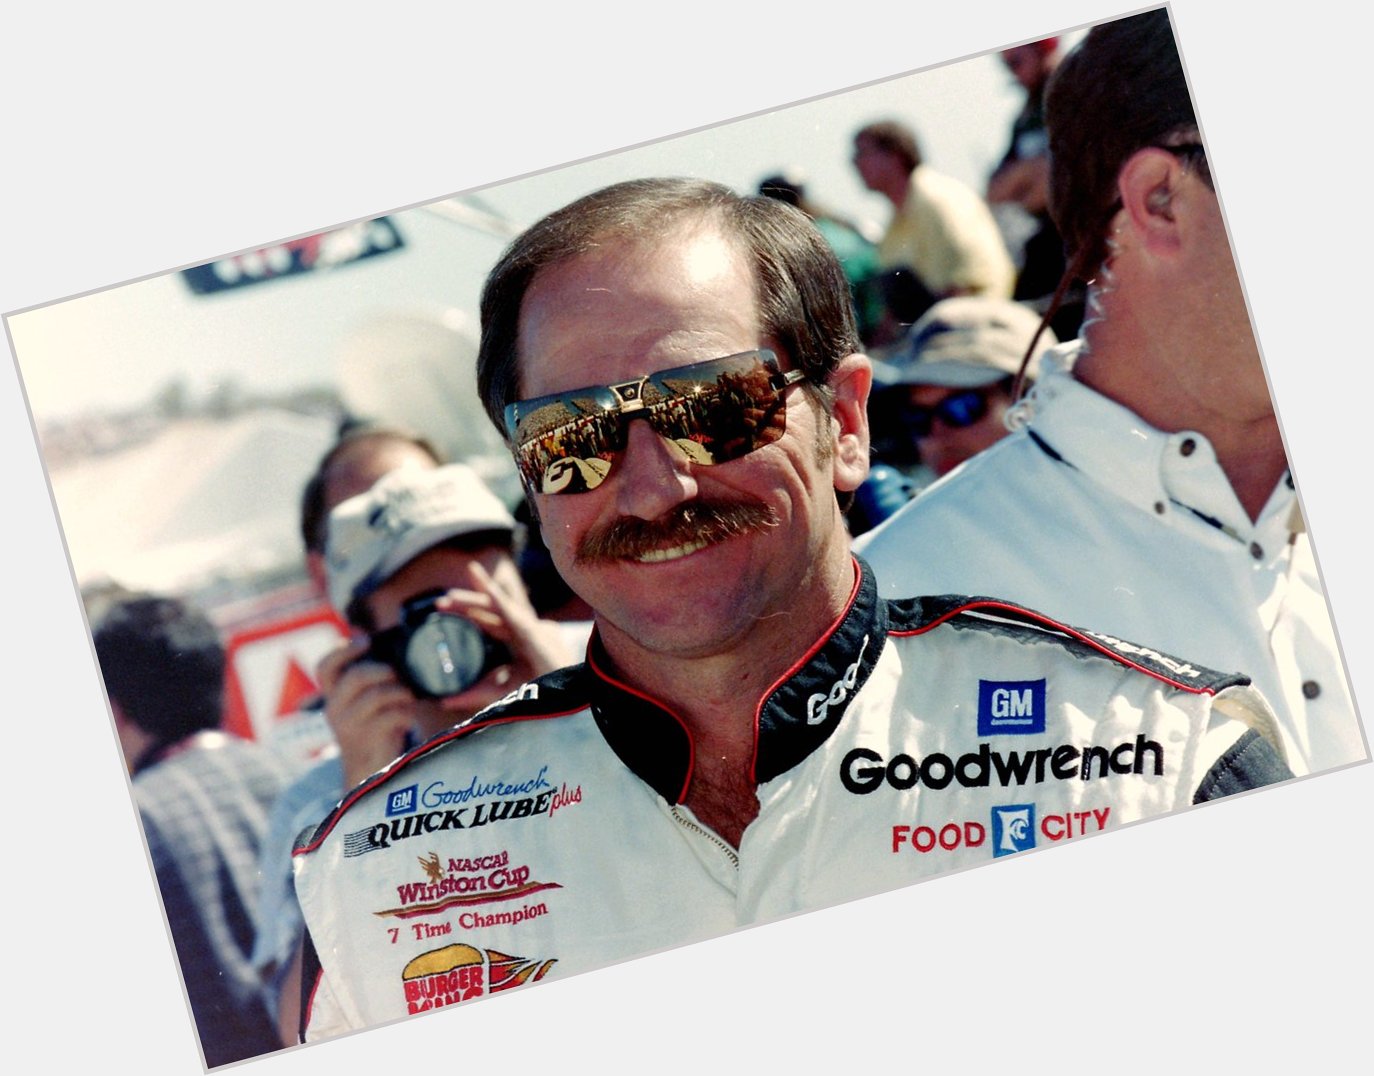 Happy Birthday to Dale Earnhardt.  Gone too soon.   